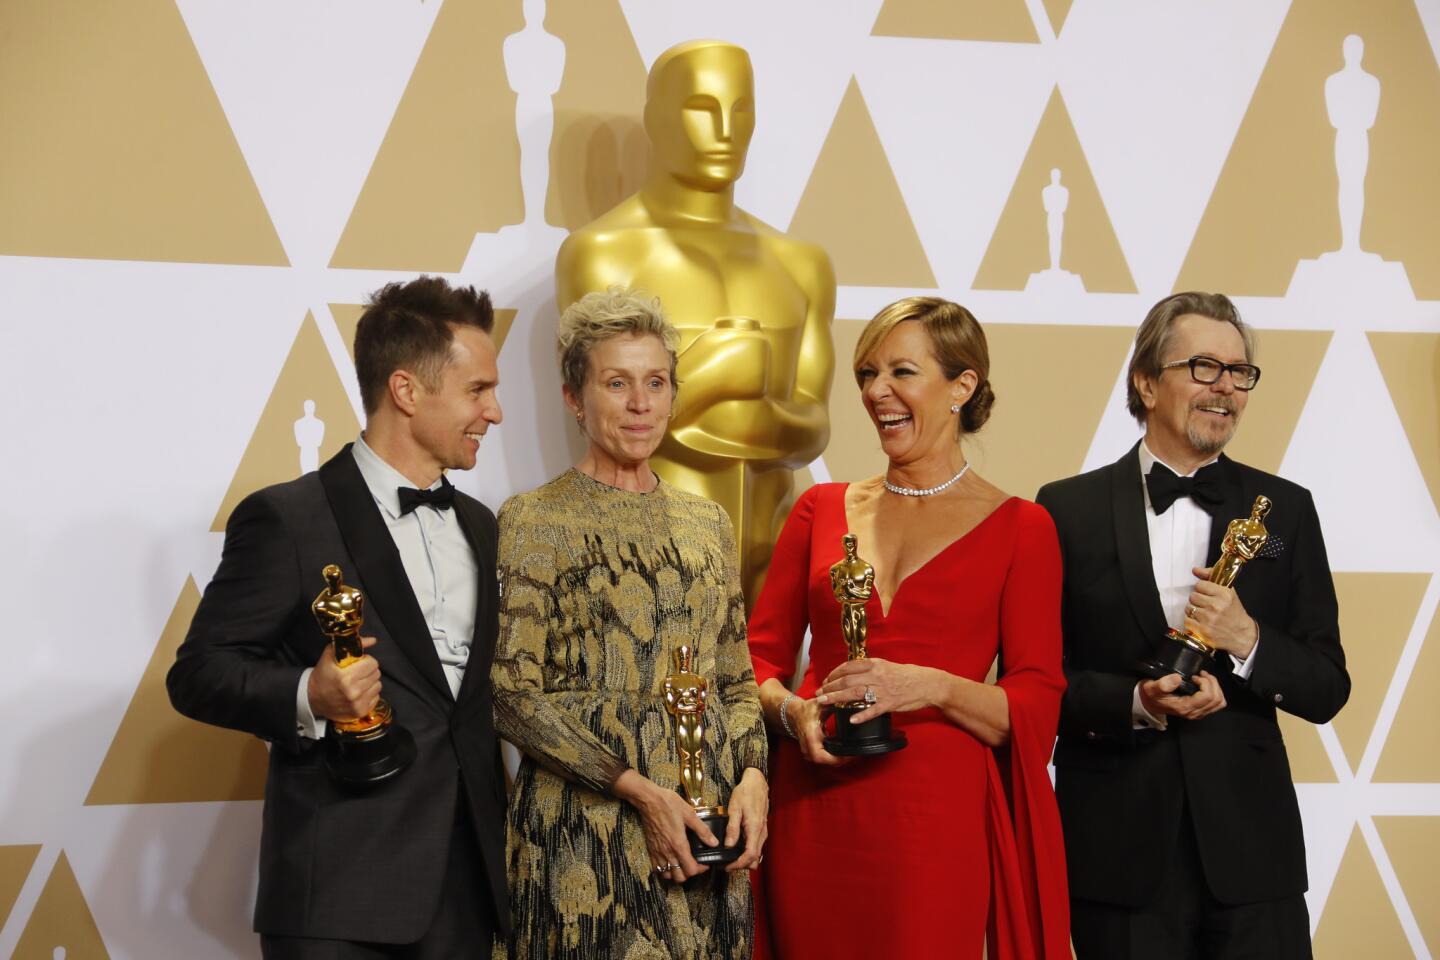 The four acting winners, from left, Sam Rockwell, supporting actor for "Three Billboards Outside Ebbing, Missouri," Frances McDormand, lead actress for "Three Billboards," Allison Janney, supporting actress for "I, Tonya" and Gary Oldman, lead actor for "Darkest Hour."